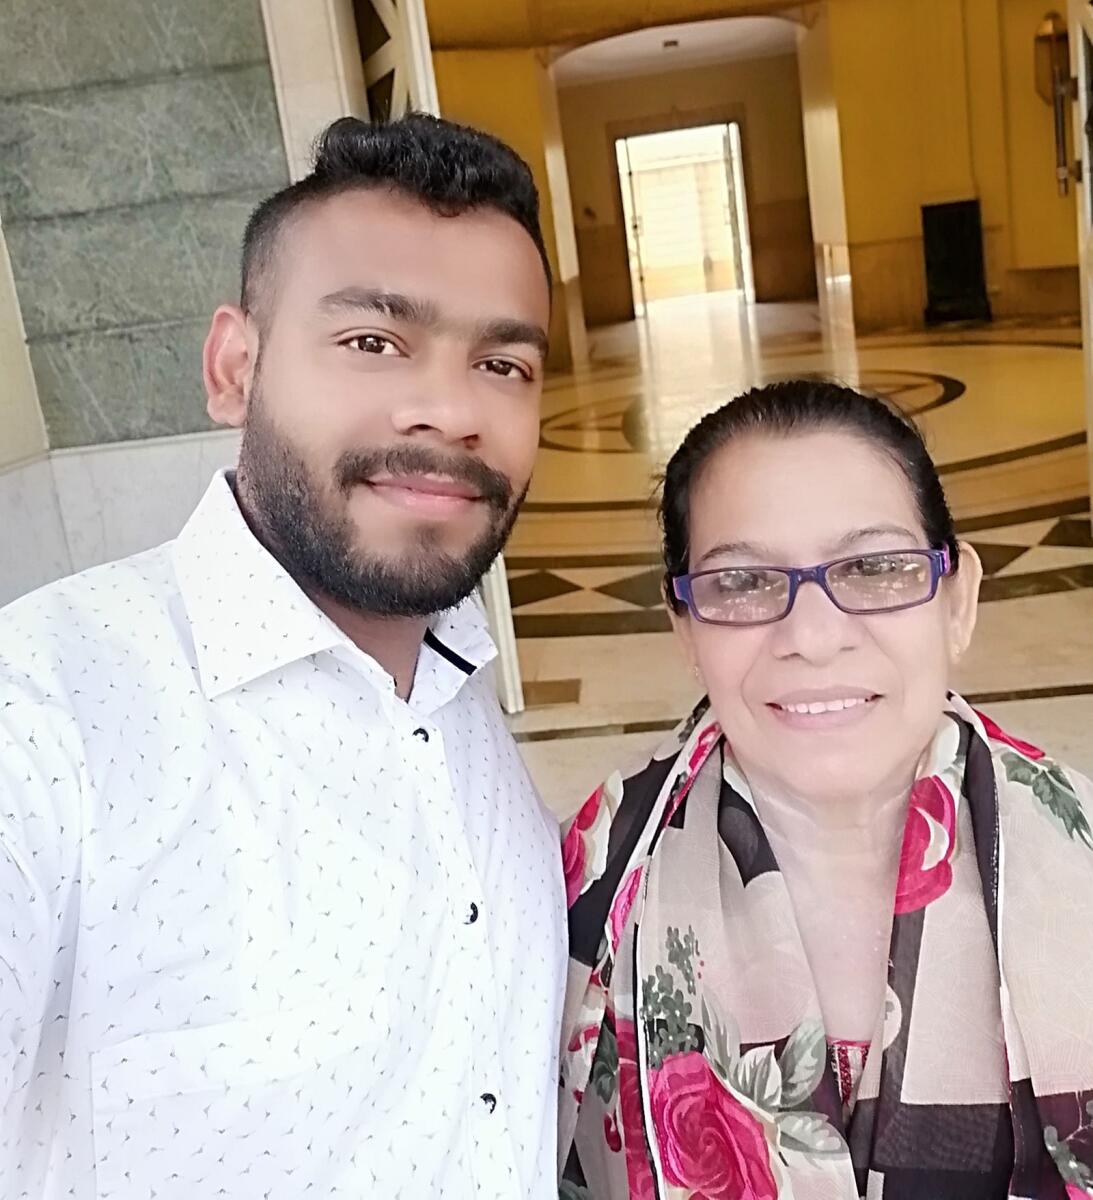 Roy with his mother Elsy Rajan. (Photo taken in 2019)